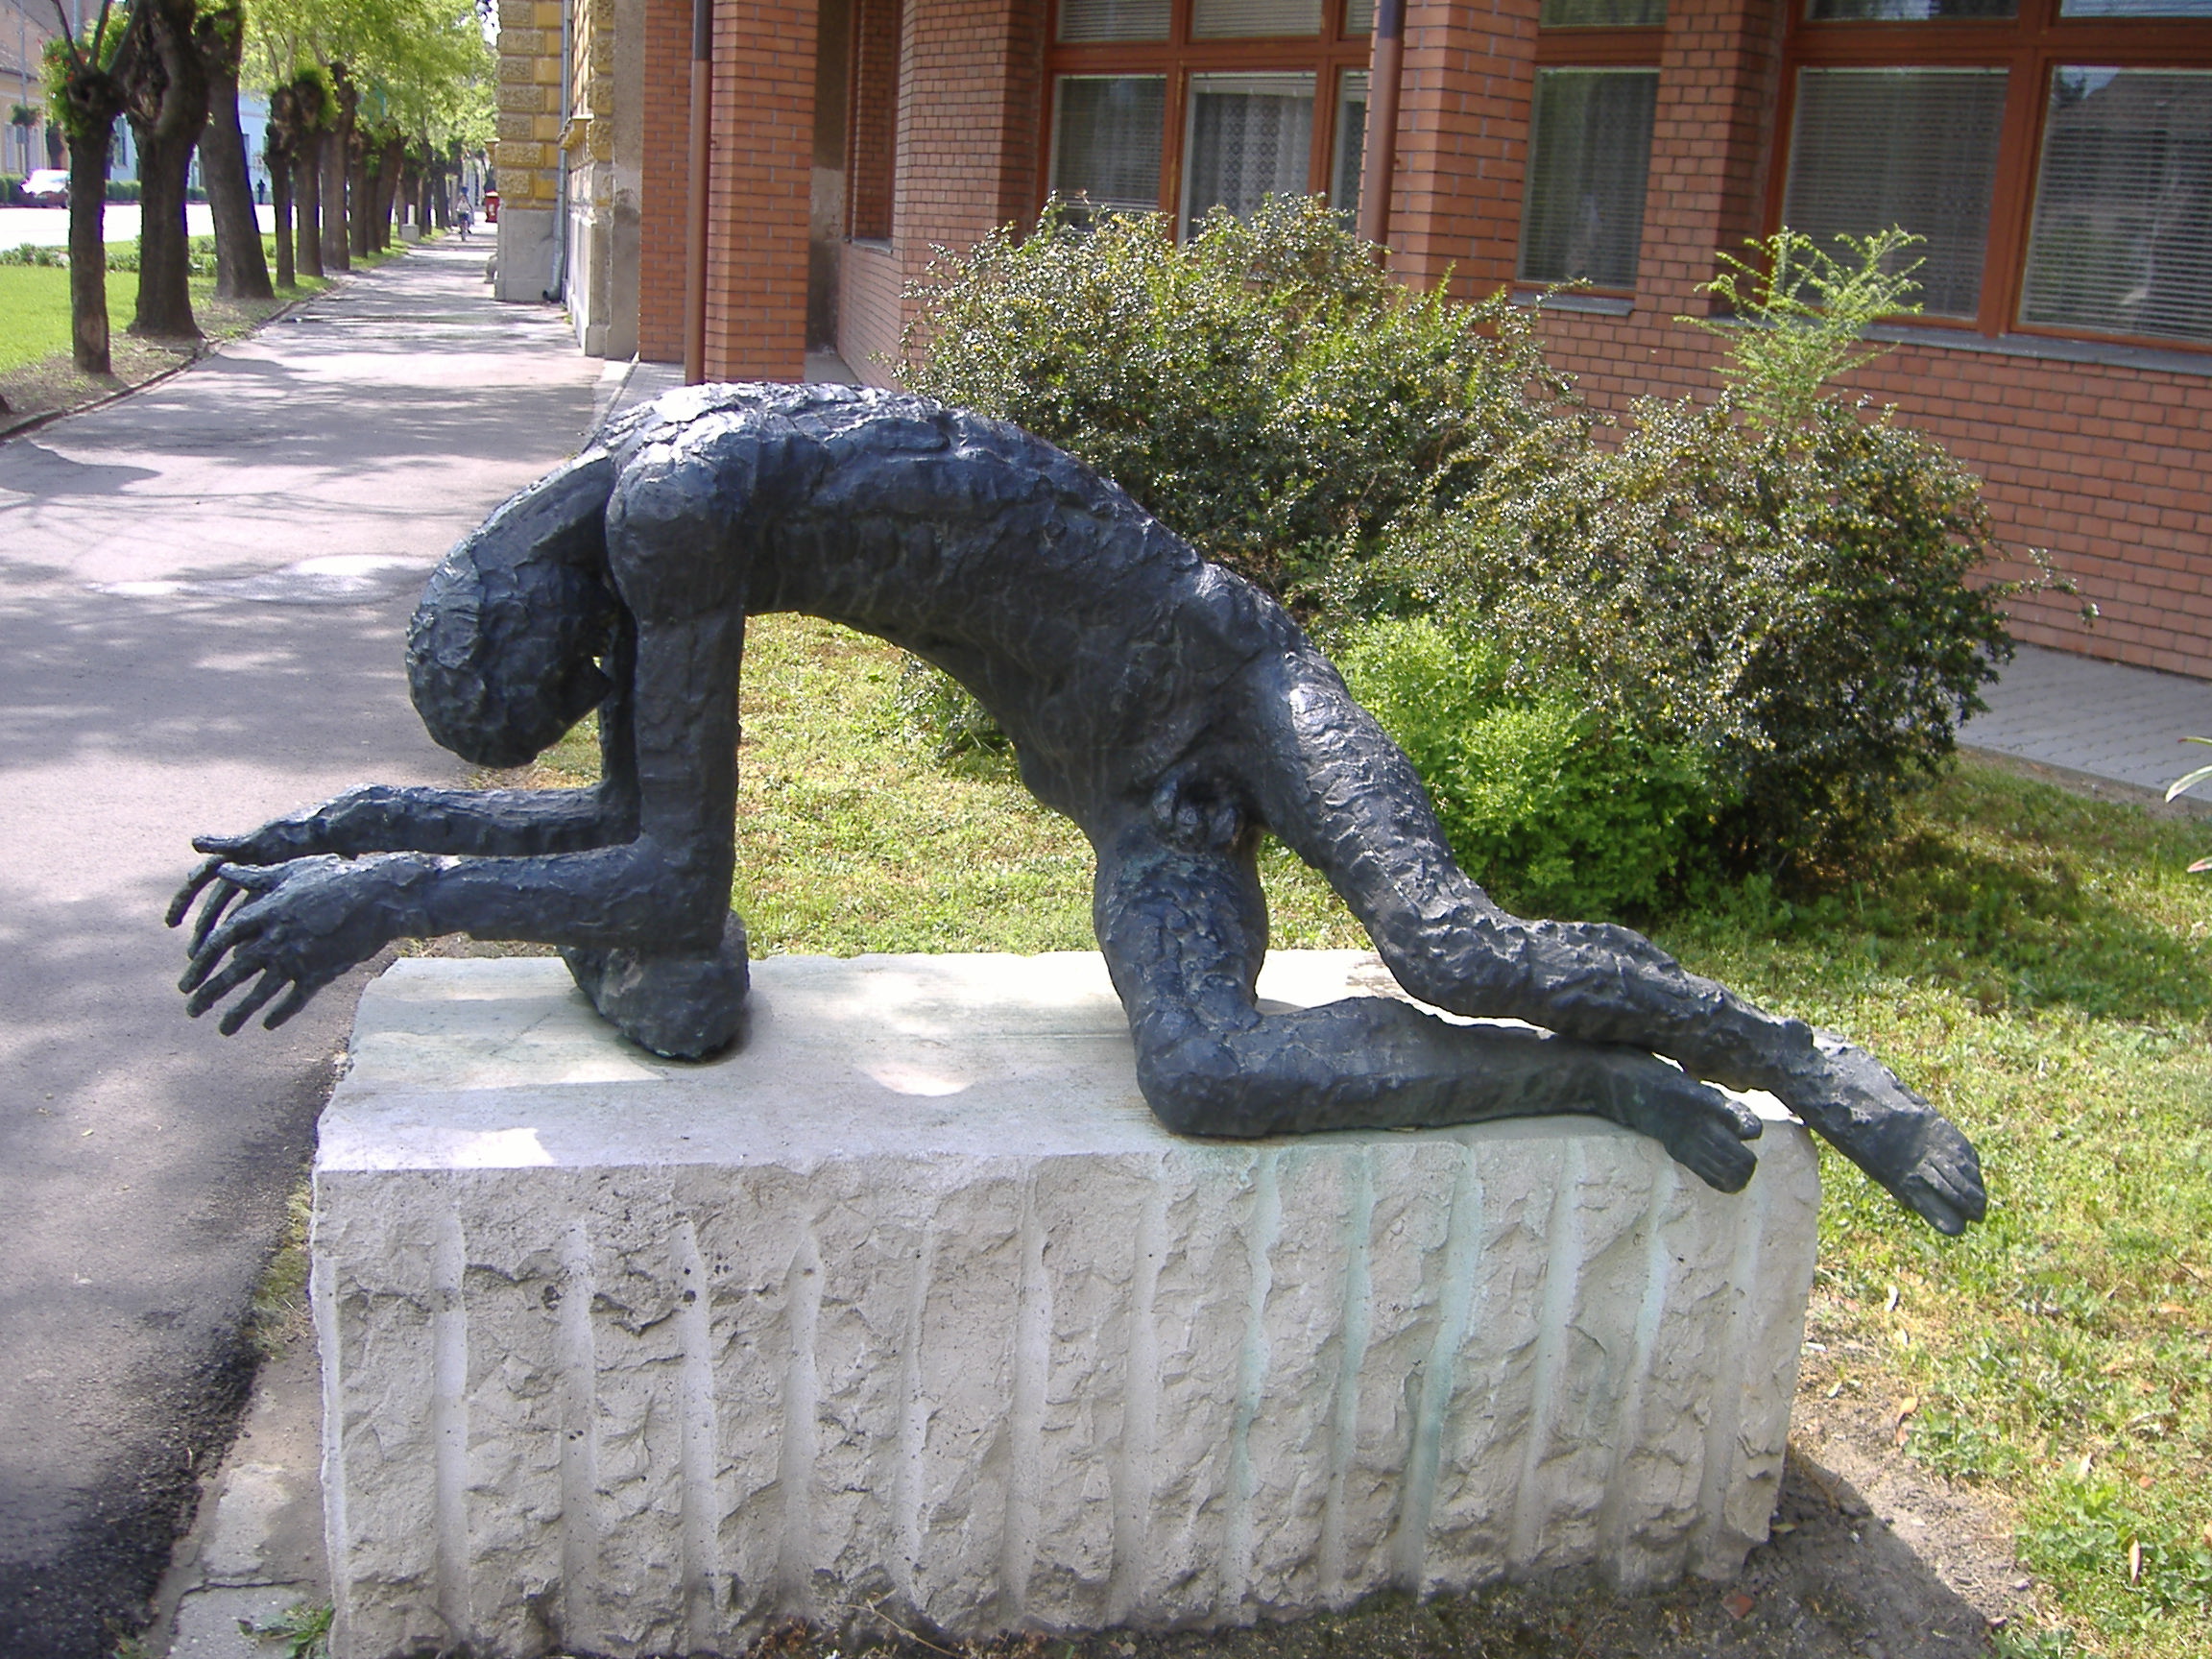 The statue of the Tired Man